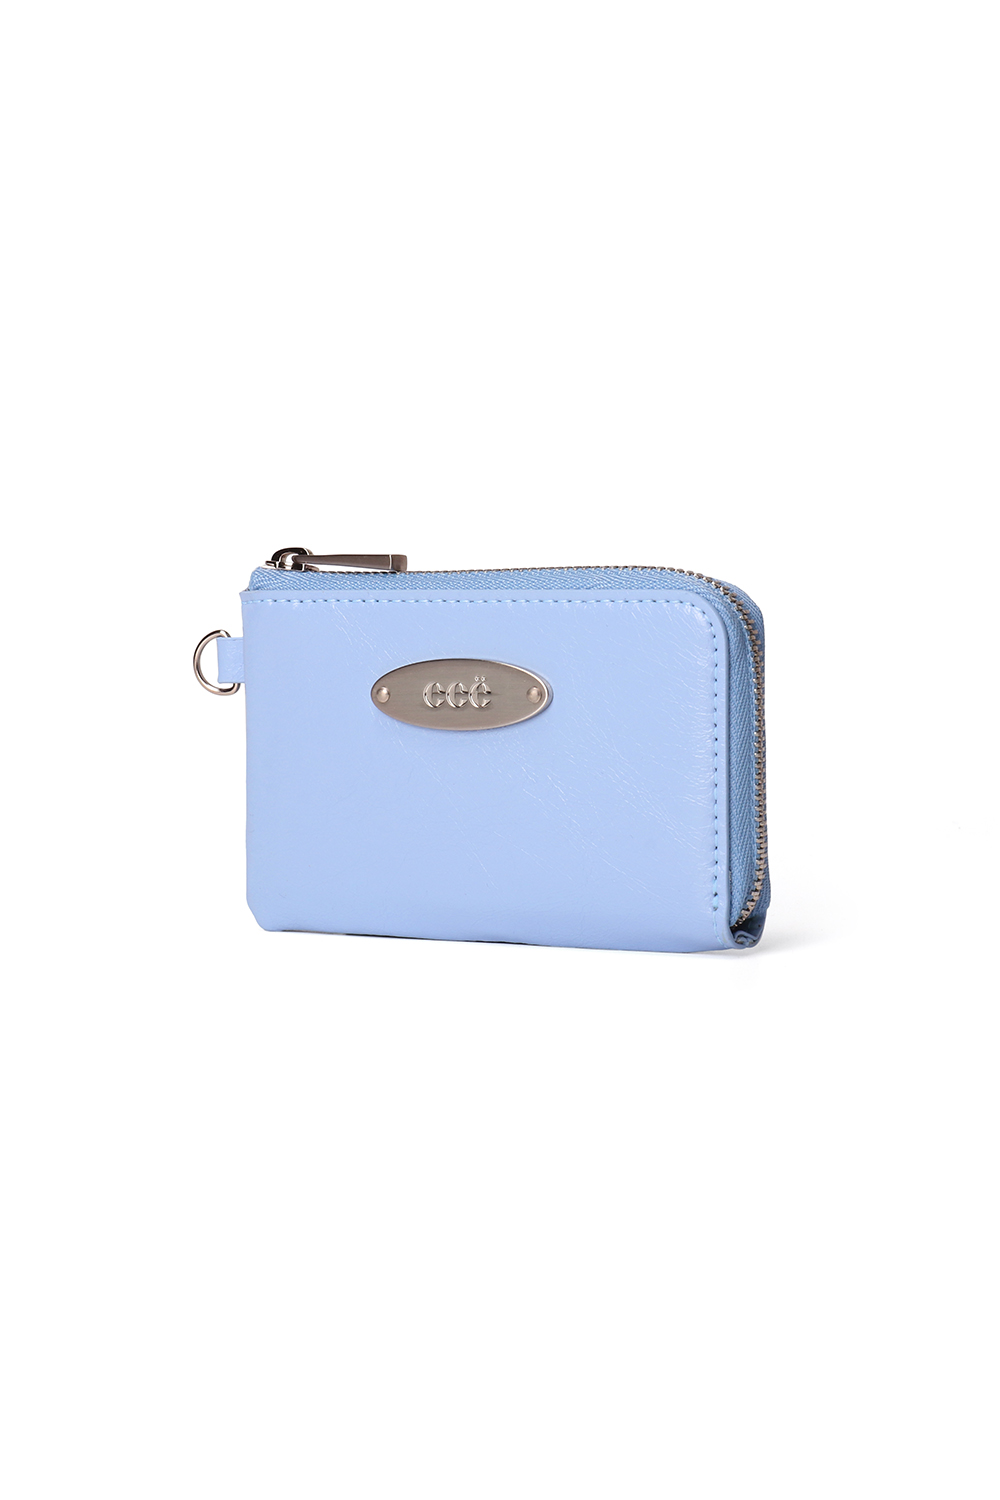 CHACHA CHAIN WALLET [SKY BLUE]